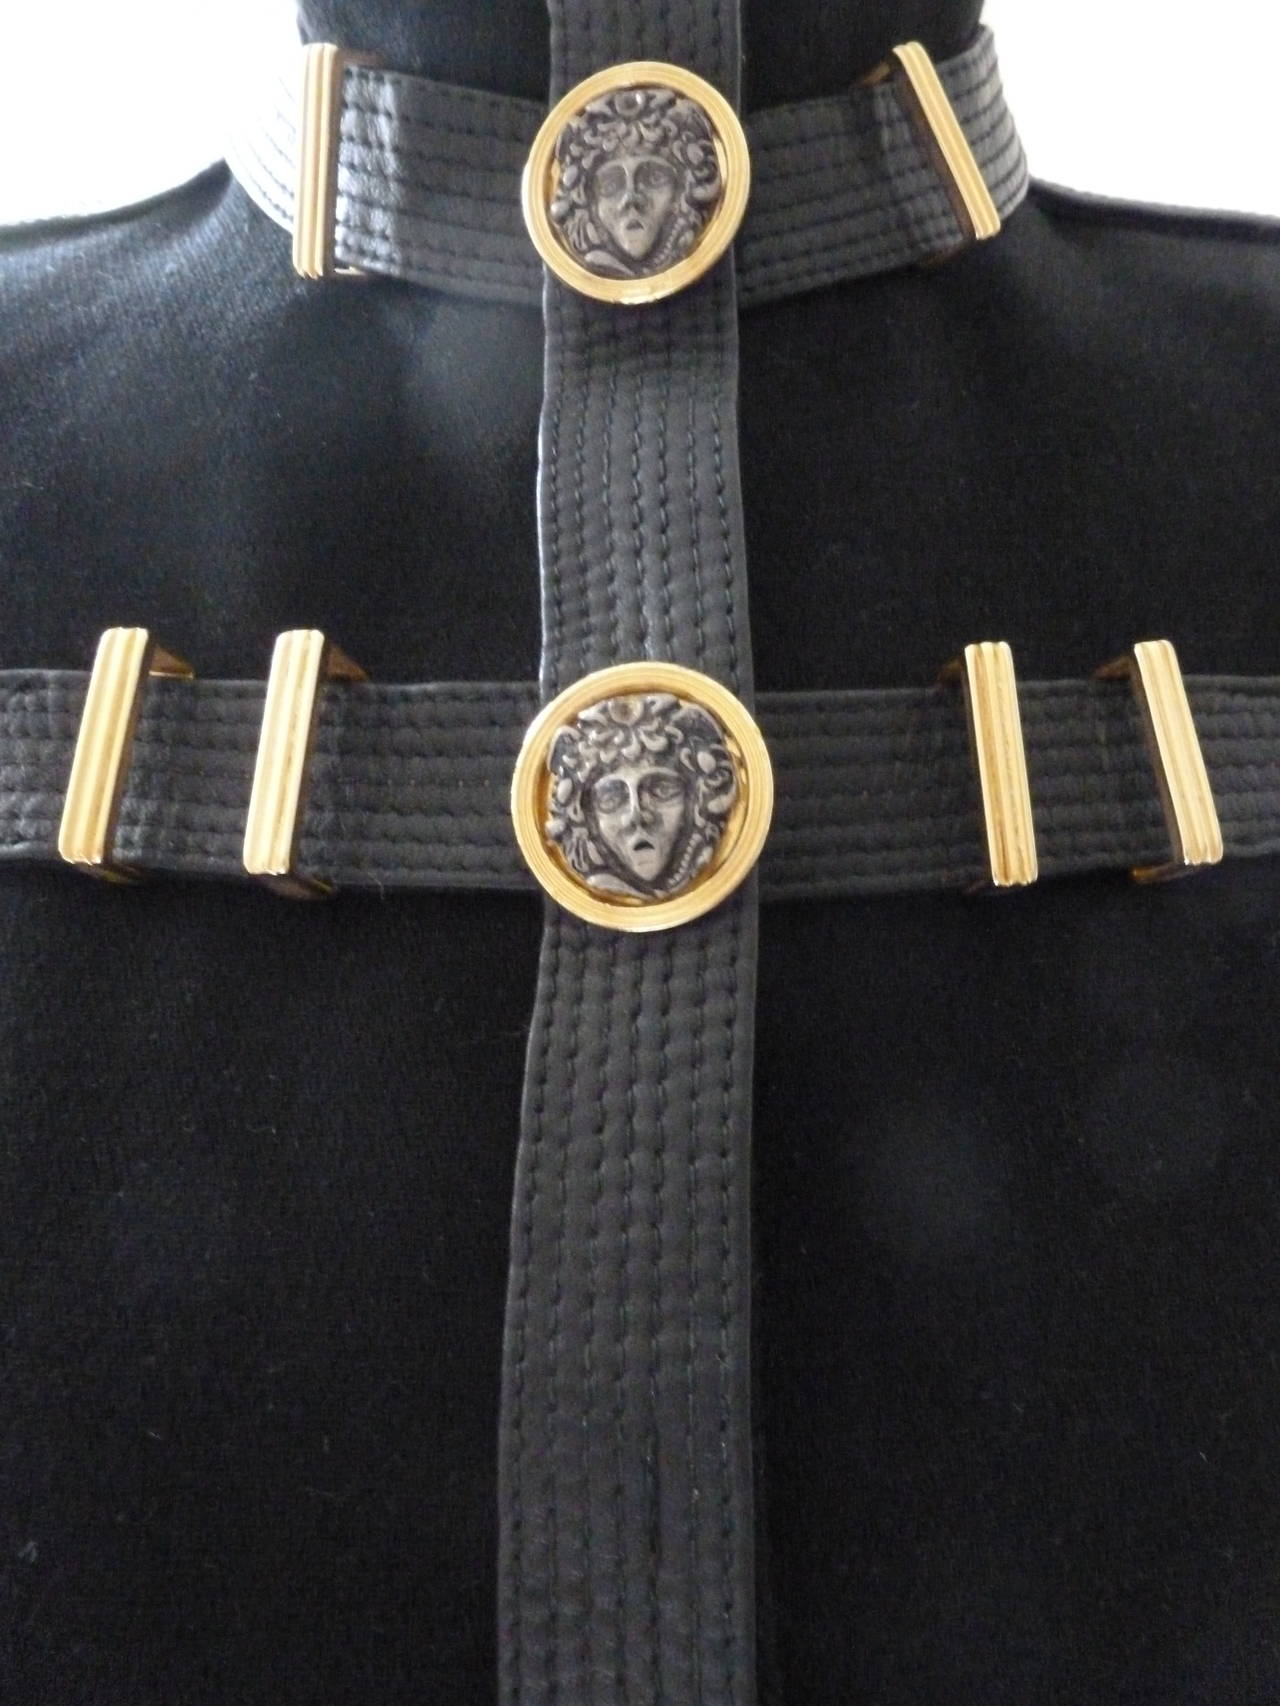 Iconic Gianni Versace Couture Bondage Harness Medallion Ensemble Fall 1992 In Excellent Condition For Sale In W1, GB